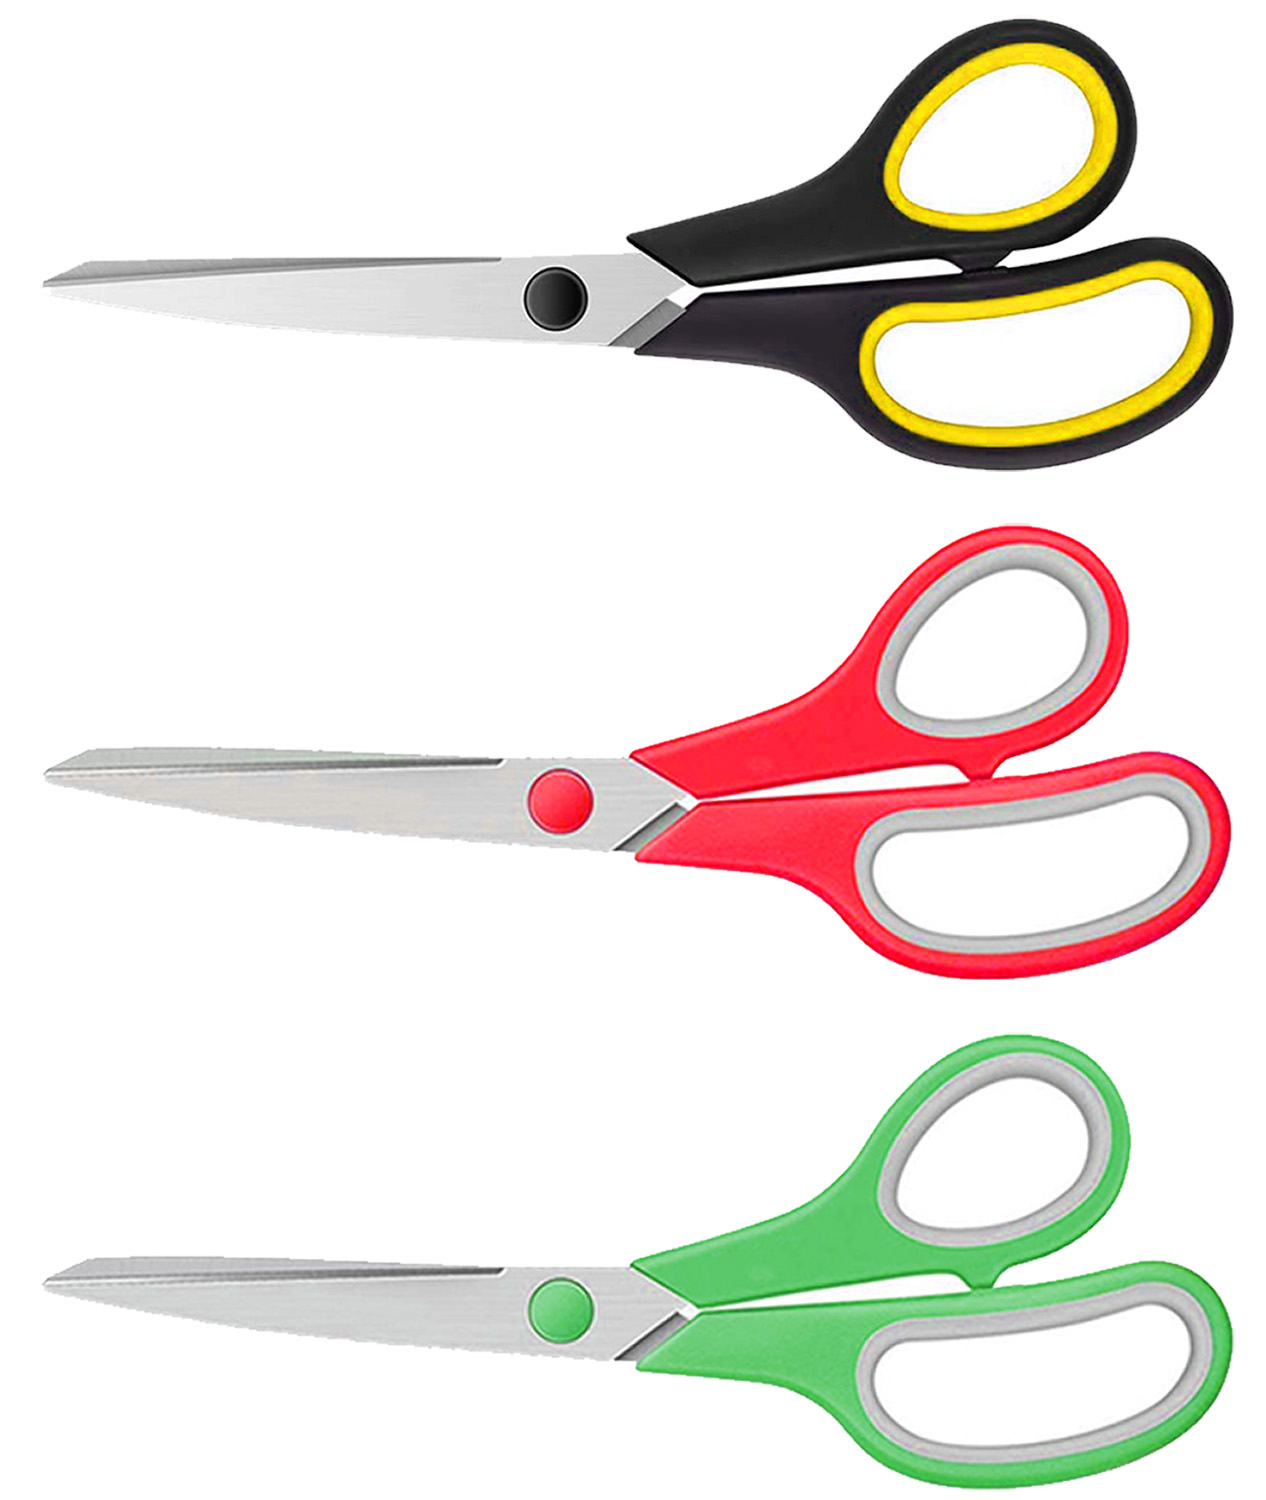 ZekPro 3 Pack Scissors 8" Craft Scissors All Purpose, Heavy Duty Sharp Blade Shears Sewing Scissor for Office, Fabric and School Supplies Left - Right Handed - image 1 of 10